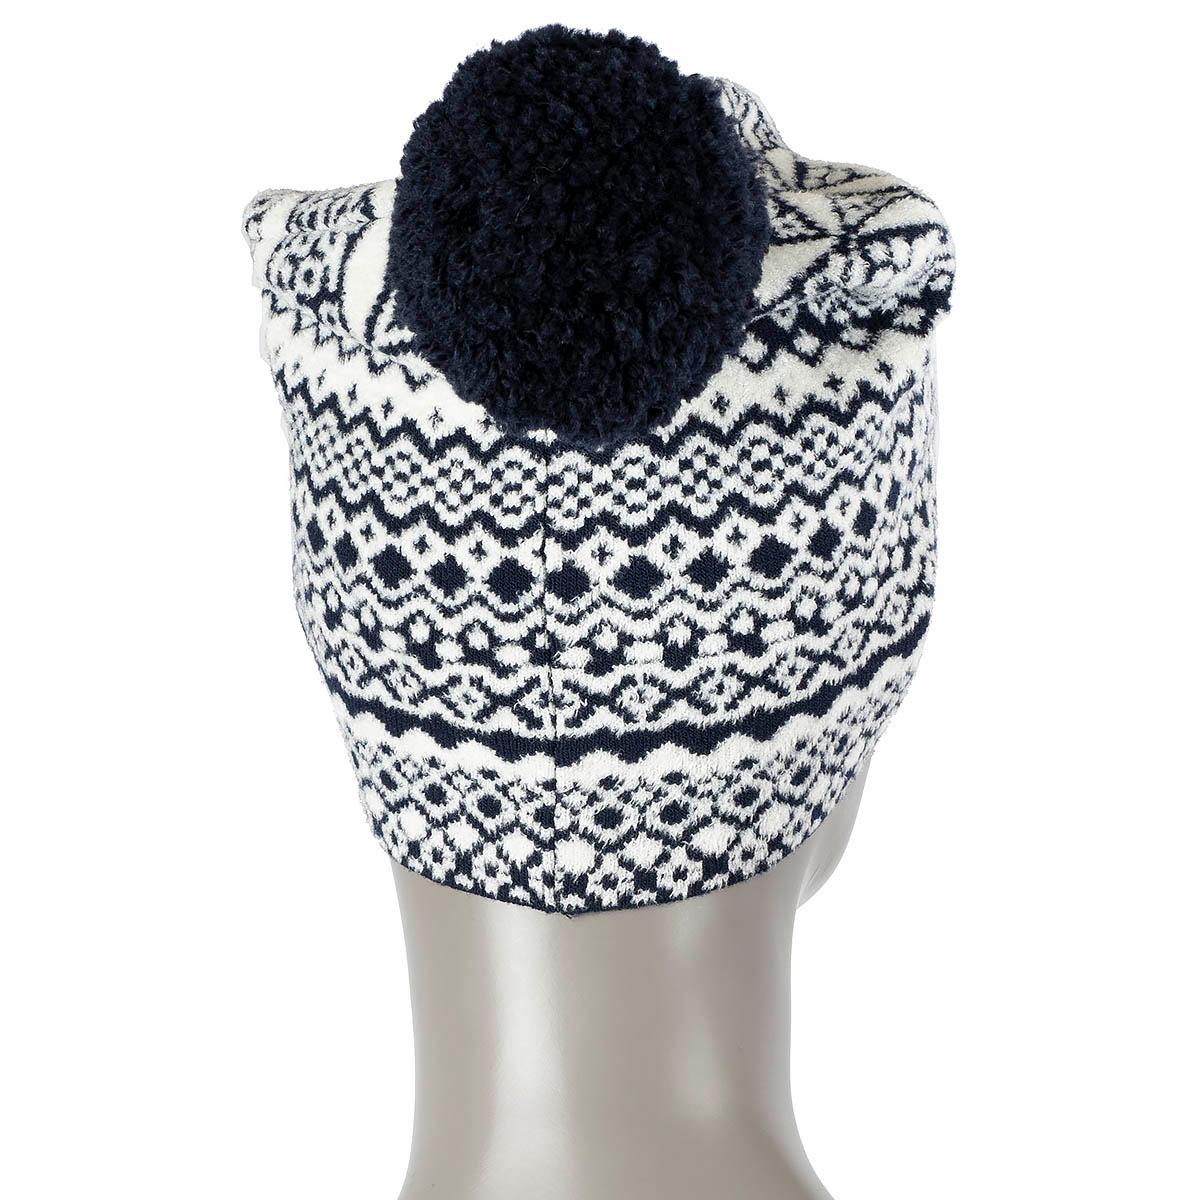 FENDI blue & white wool blend HERITAGE POMPOM Beanie Knit Hat One Size In Excellent Condition For Sale In Zürich, CH